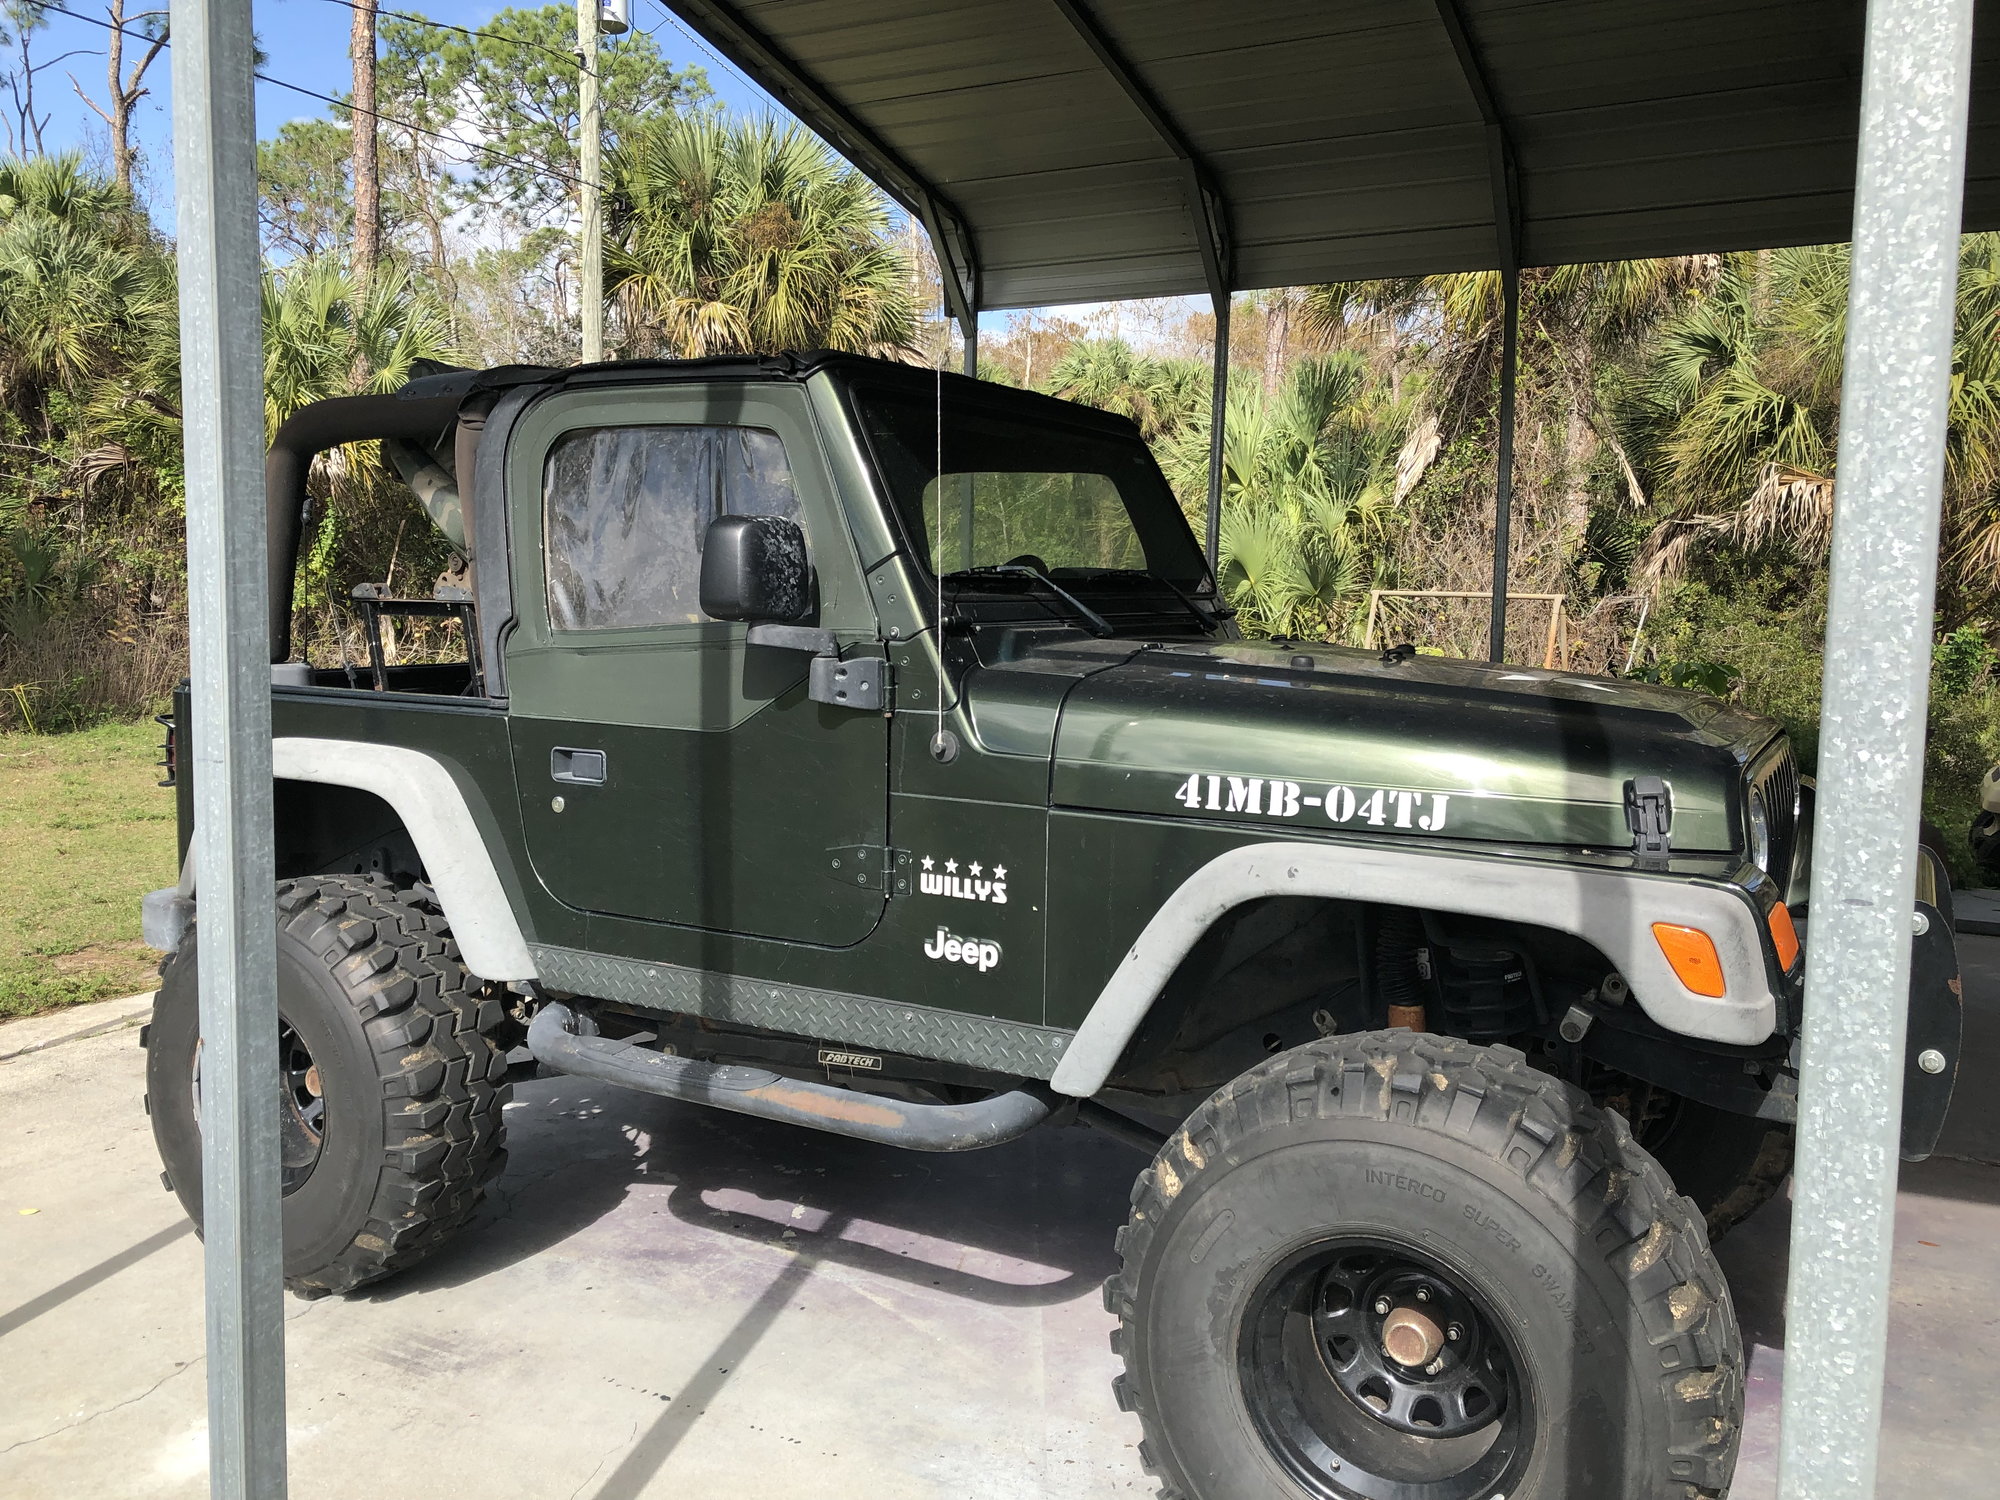 2004 Jeep Wrangler Willys Edition 17,900 miles - The Hull Truth - Boating  and Fishing Forum